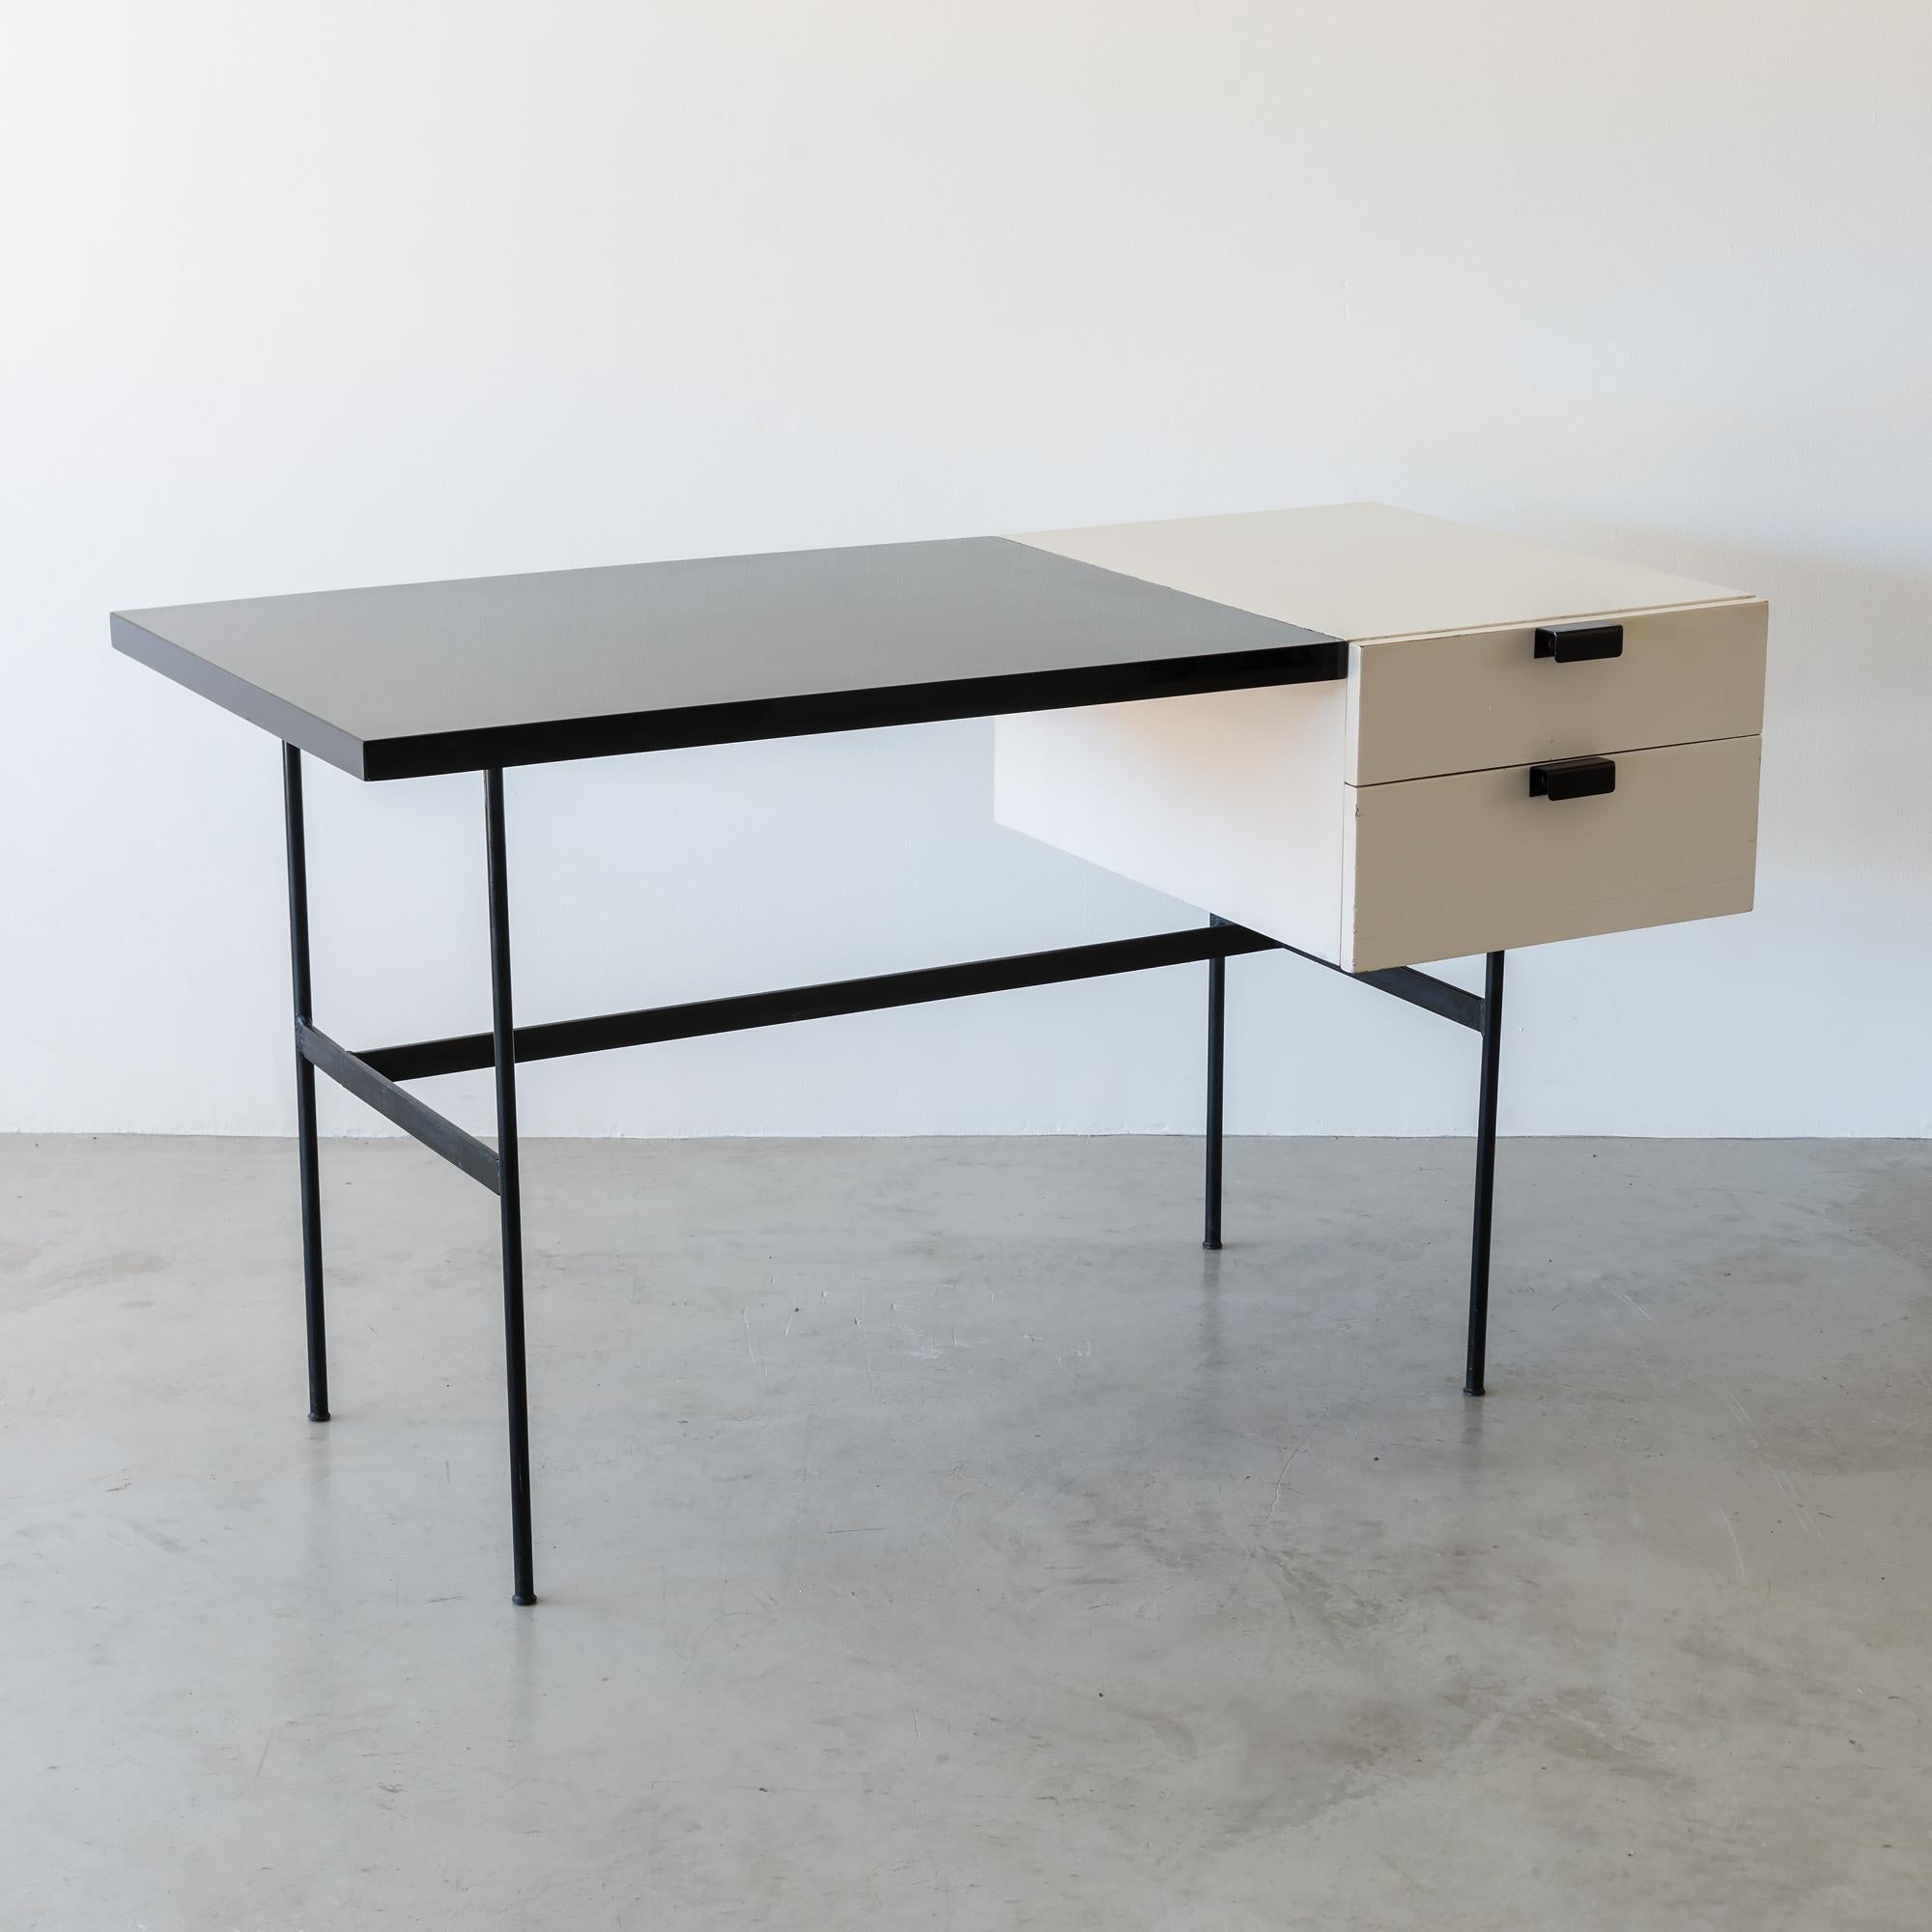 This elegant, spare writing desk model CM141 by Pierre Paulin for Thonet has a rare, original white lacquered drawer box. Writing top in black laminated wood, frame in black lacquered metal. France, 1950s.